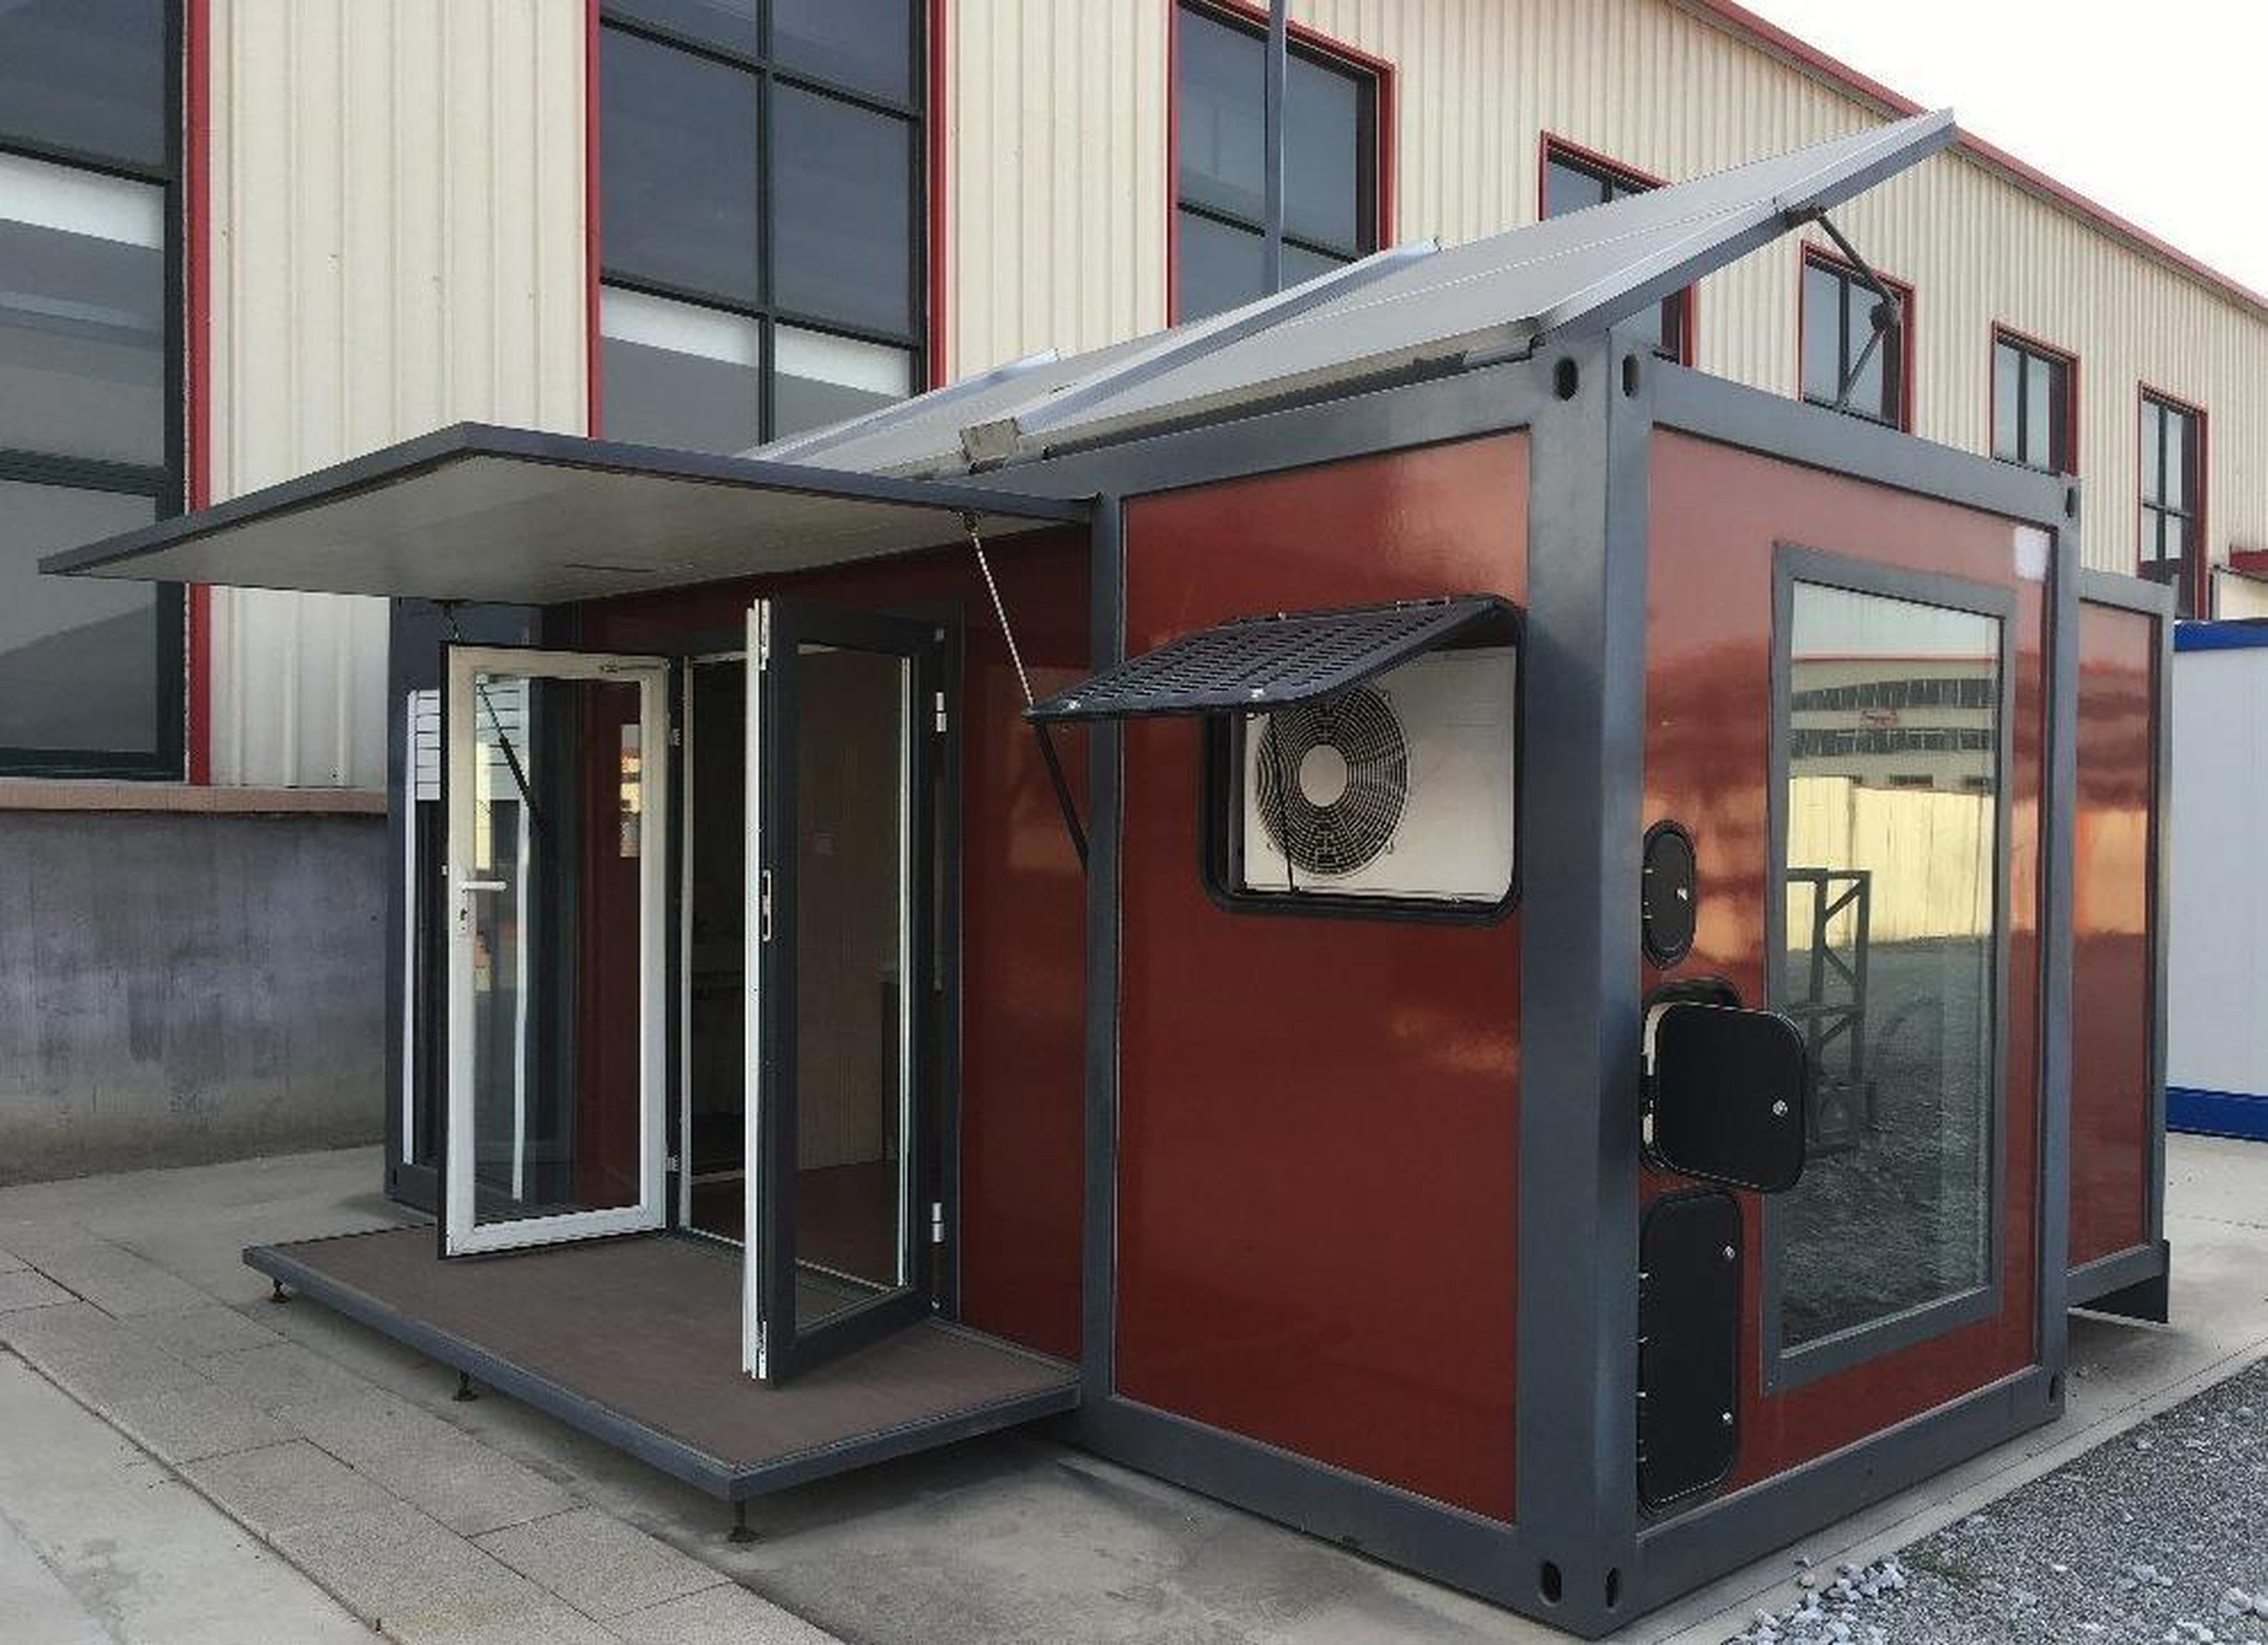 The module container house expands with a remote control. It features a folding deck and a canopy, and solar panels can be seen on the roof.